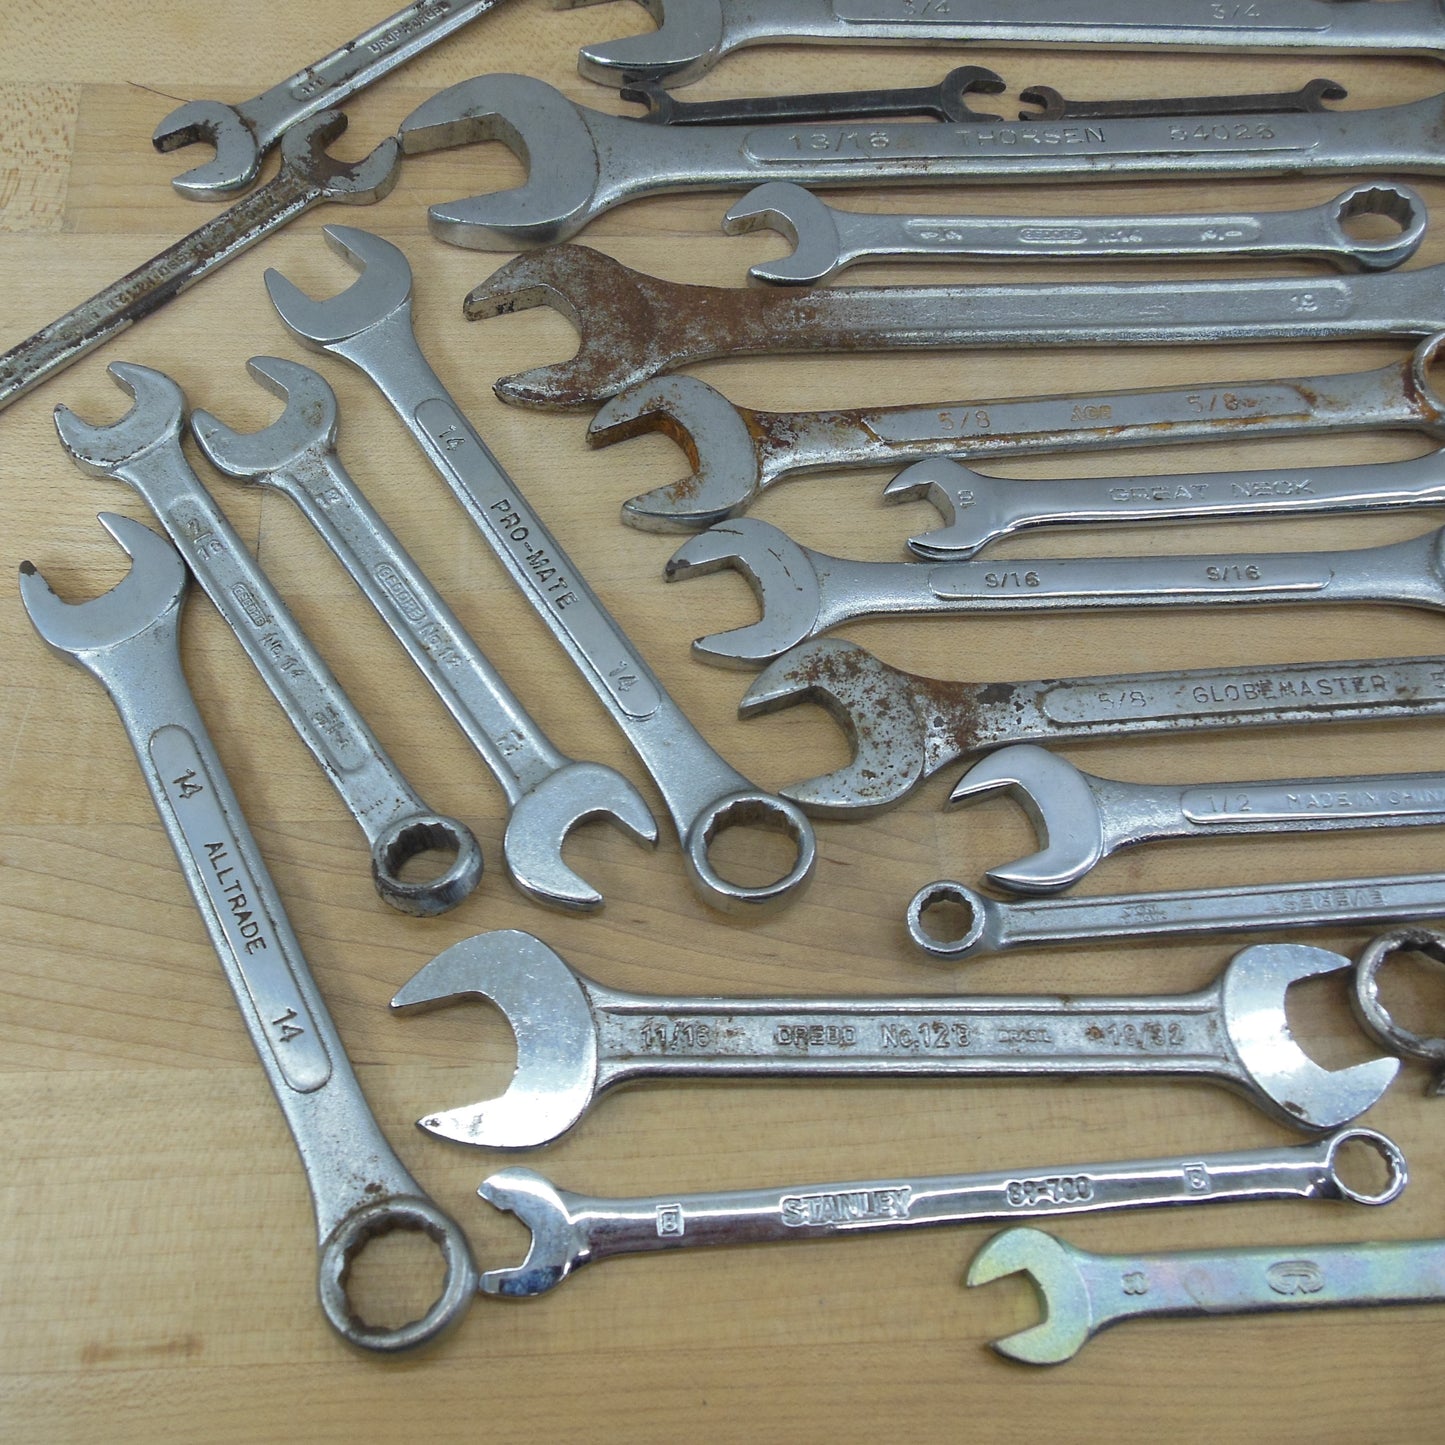 Misc. Mixed Maker Estate Lot 36 Mechanics Wrenches Open Box Combo used